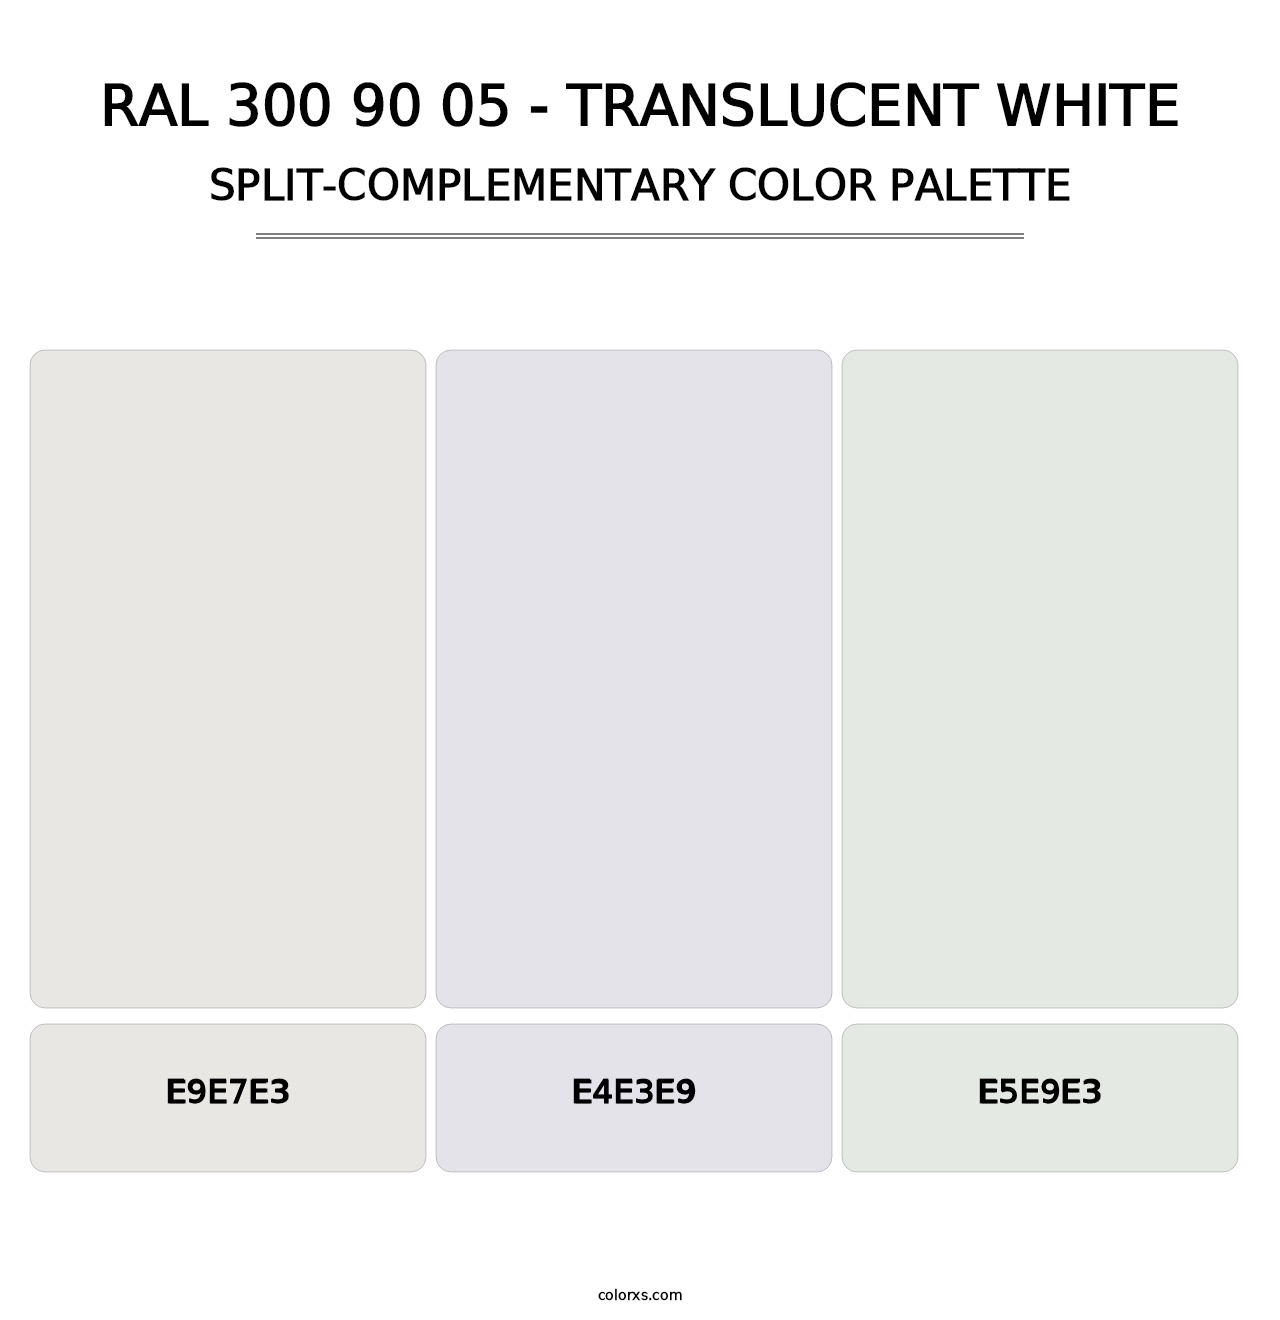 RAL 300 90 05 - Translucent White - Split-Complementary Color Palette